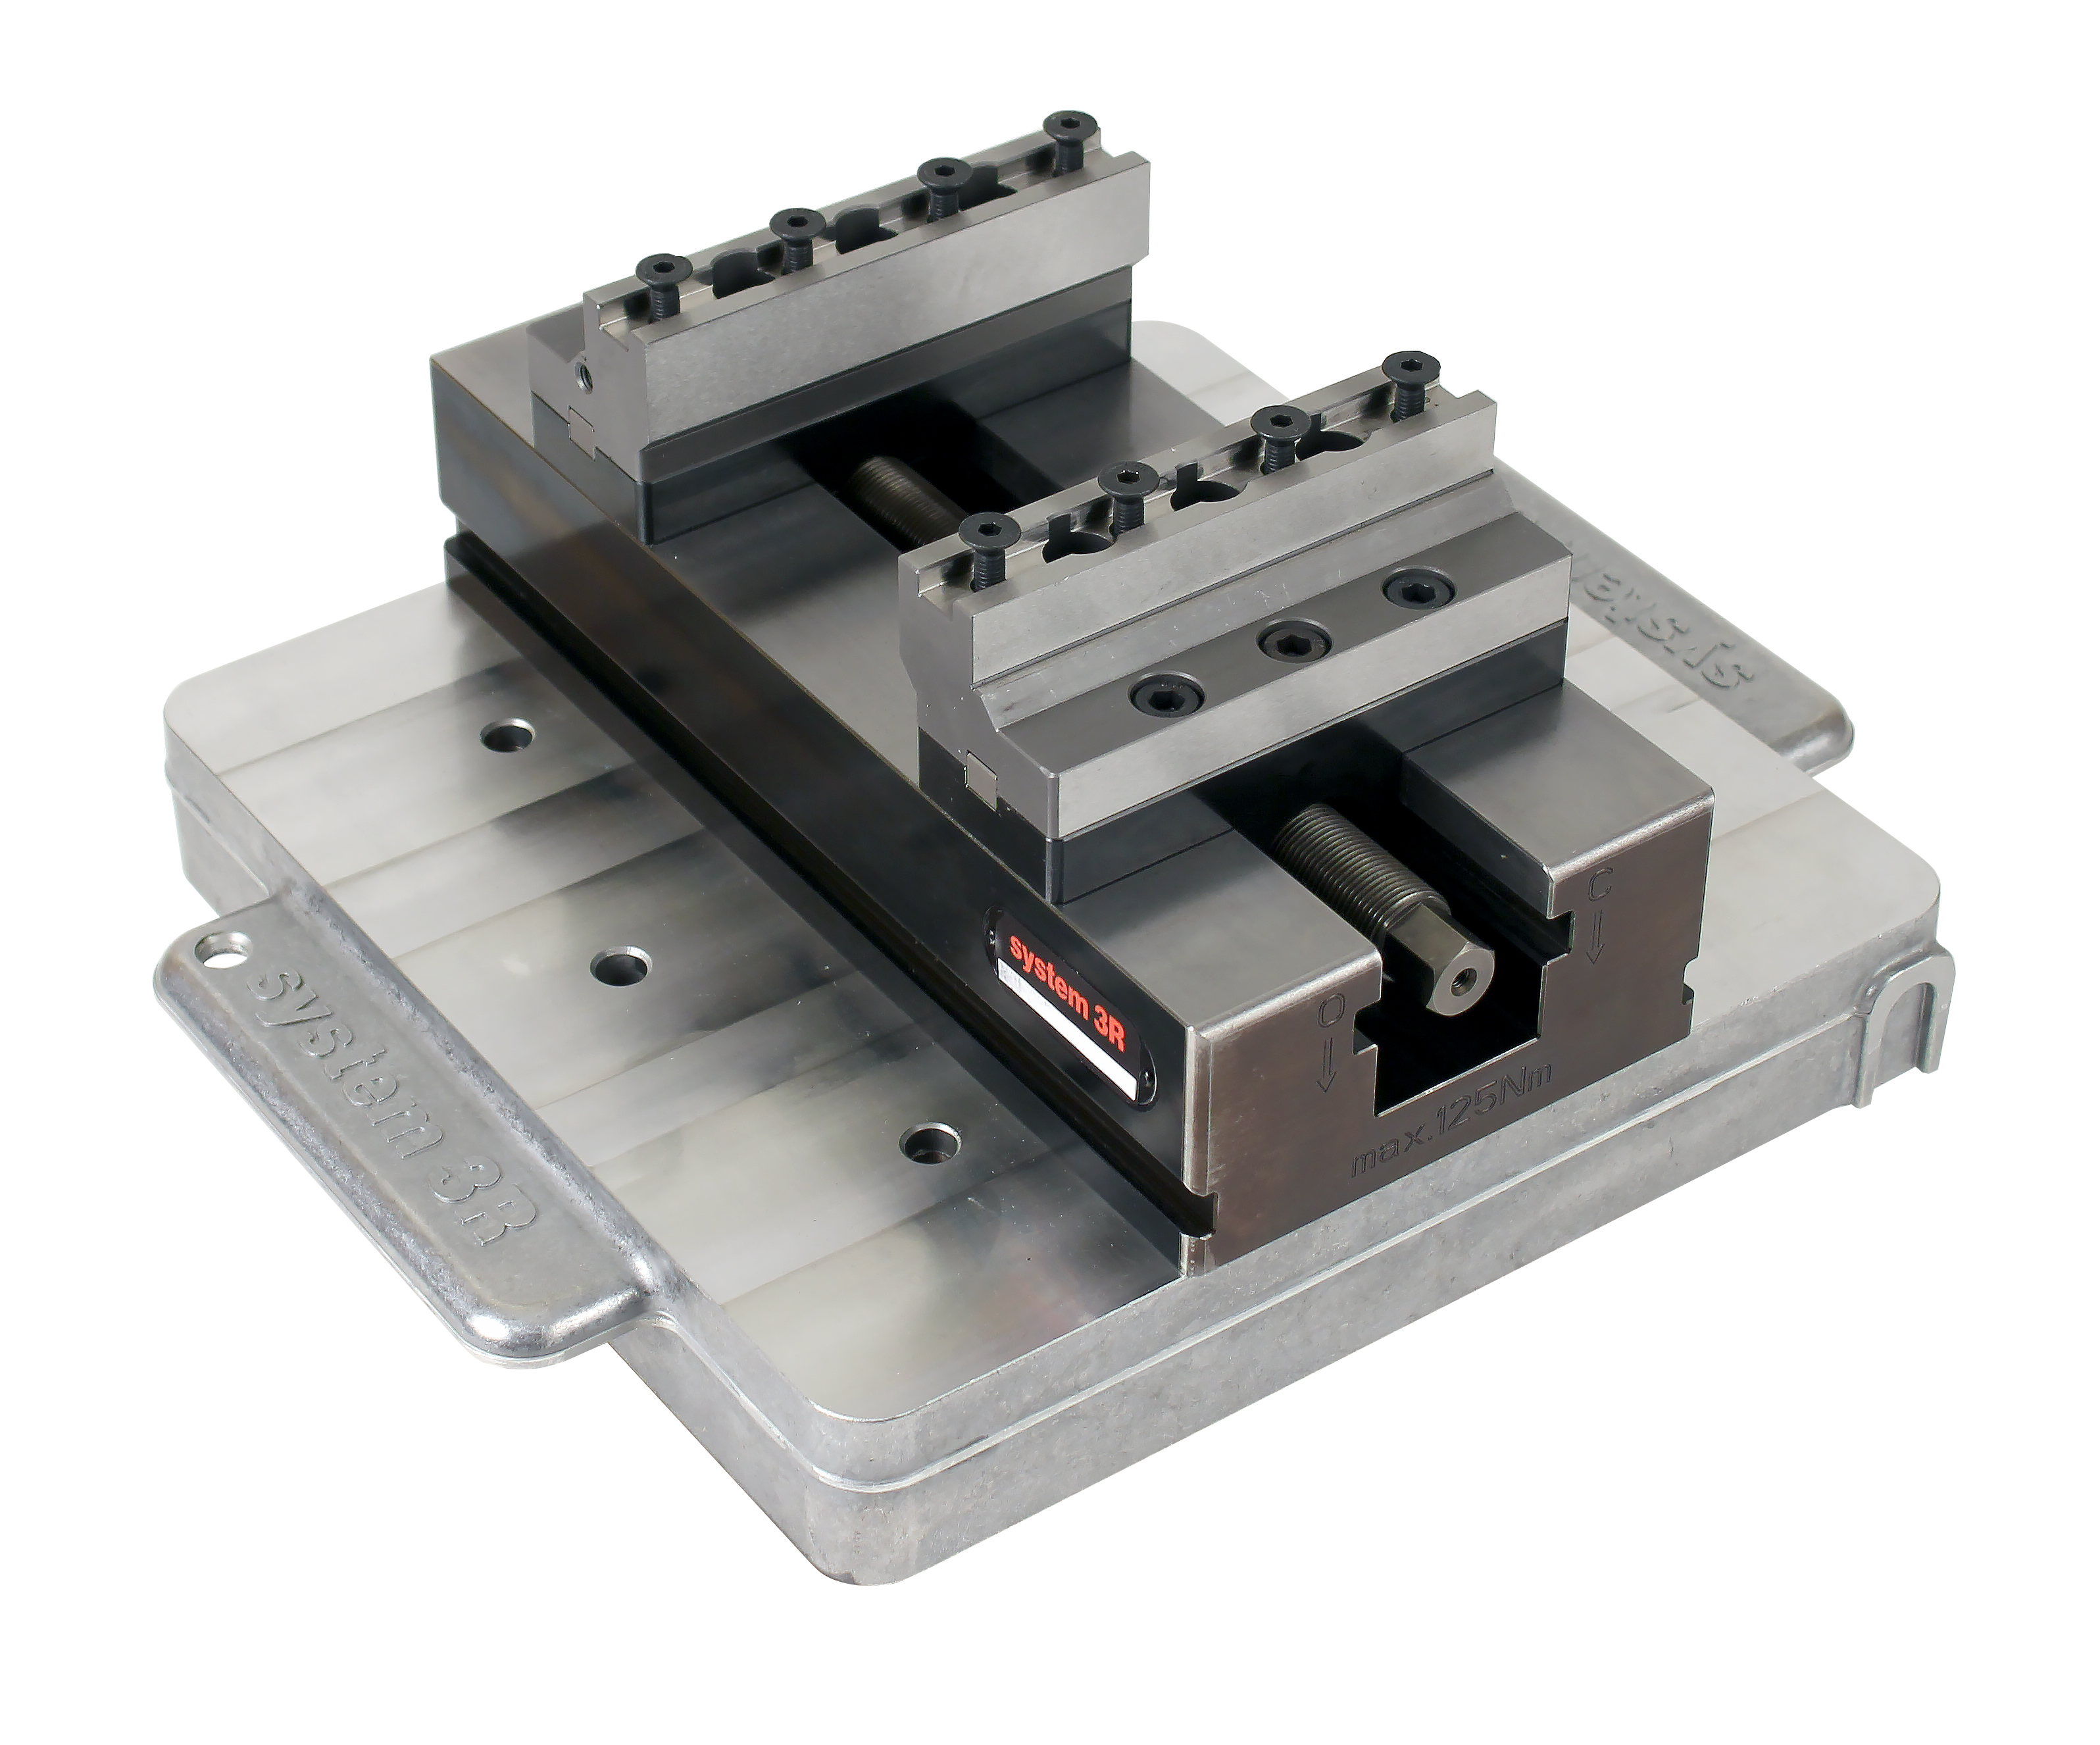 Self-Centering vice on Dynafix pallet. Reversible ground jaws with option to choose between different inserts (not included).